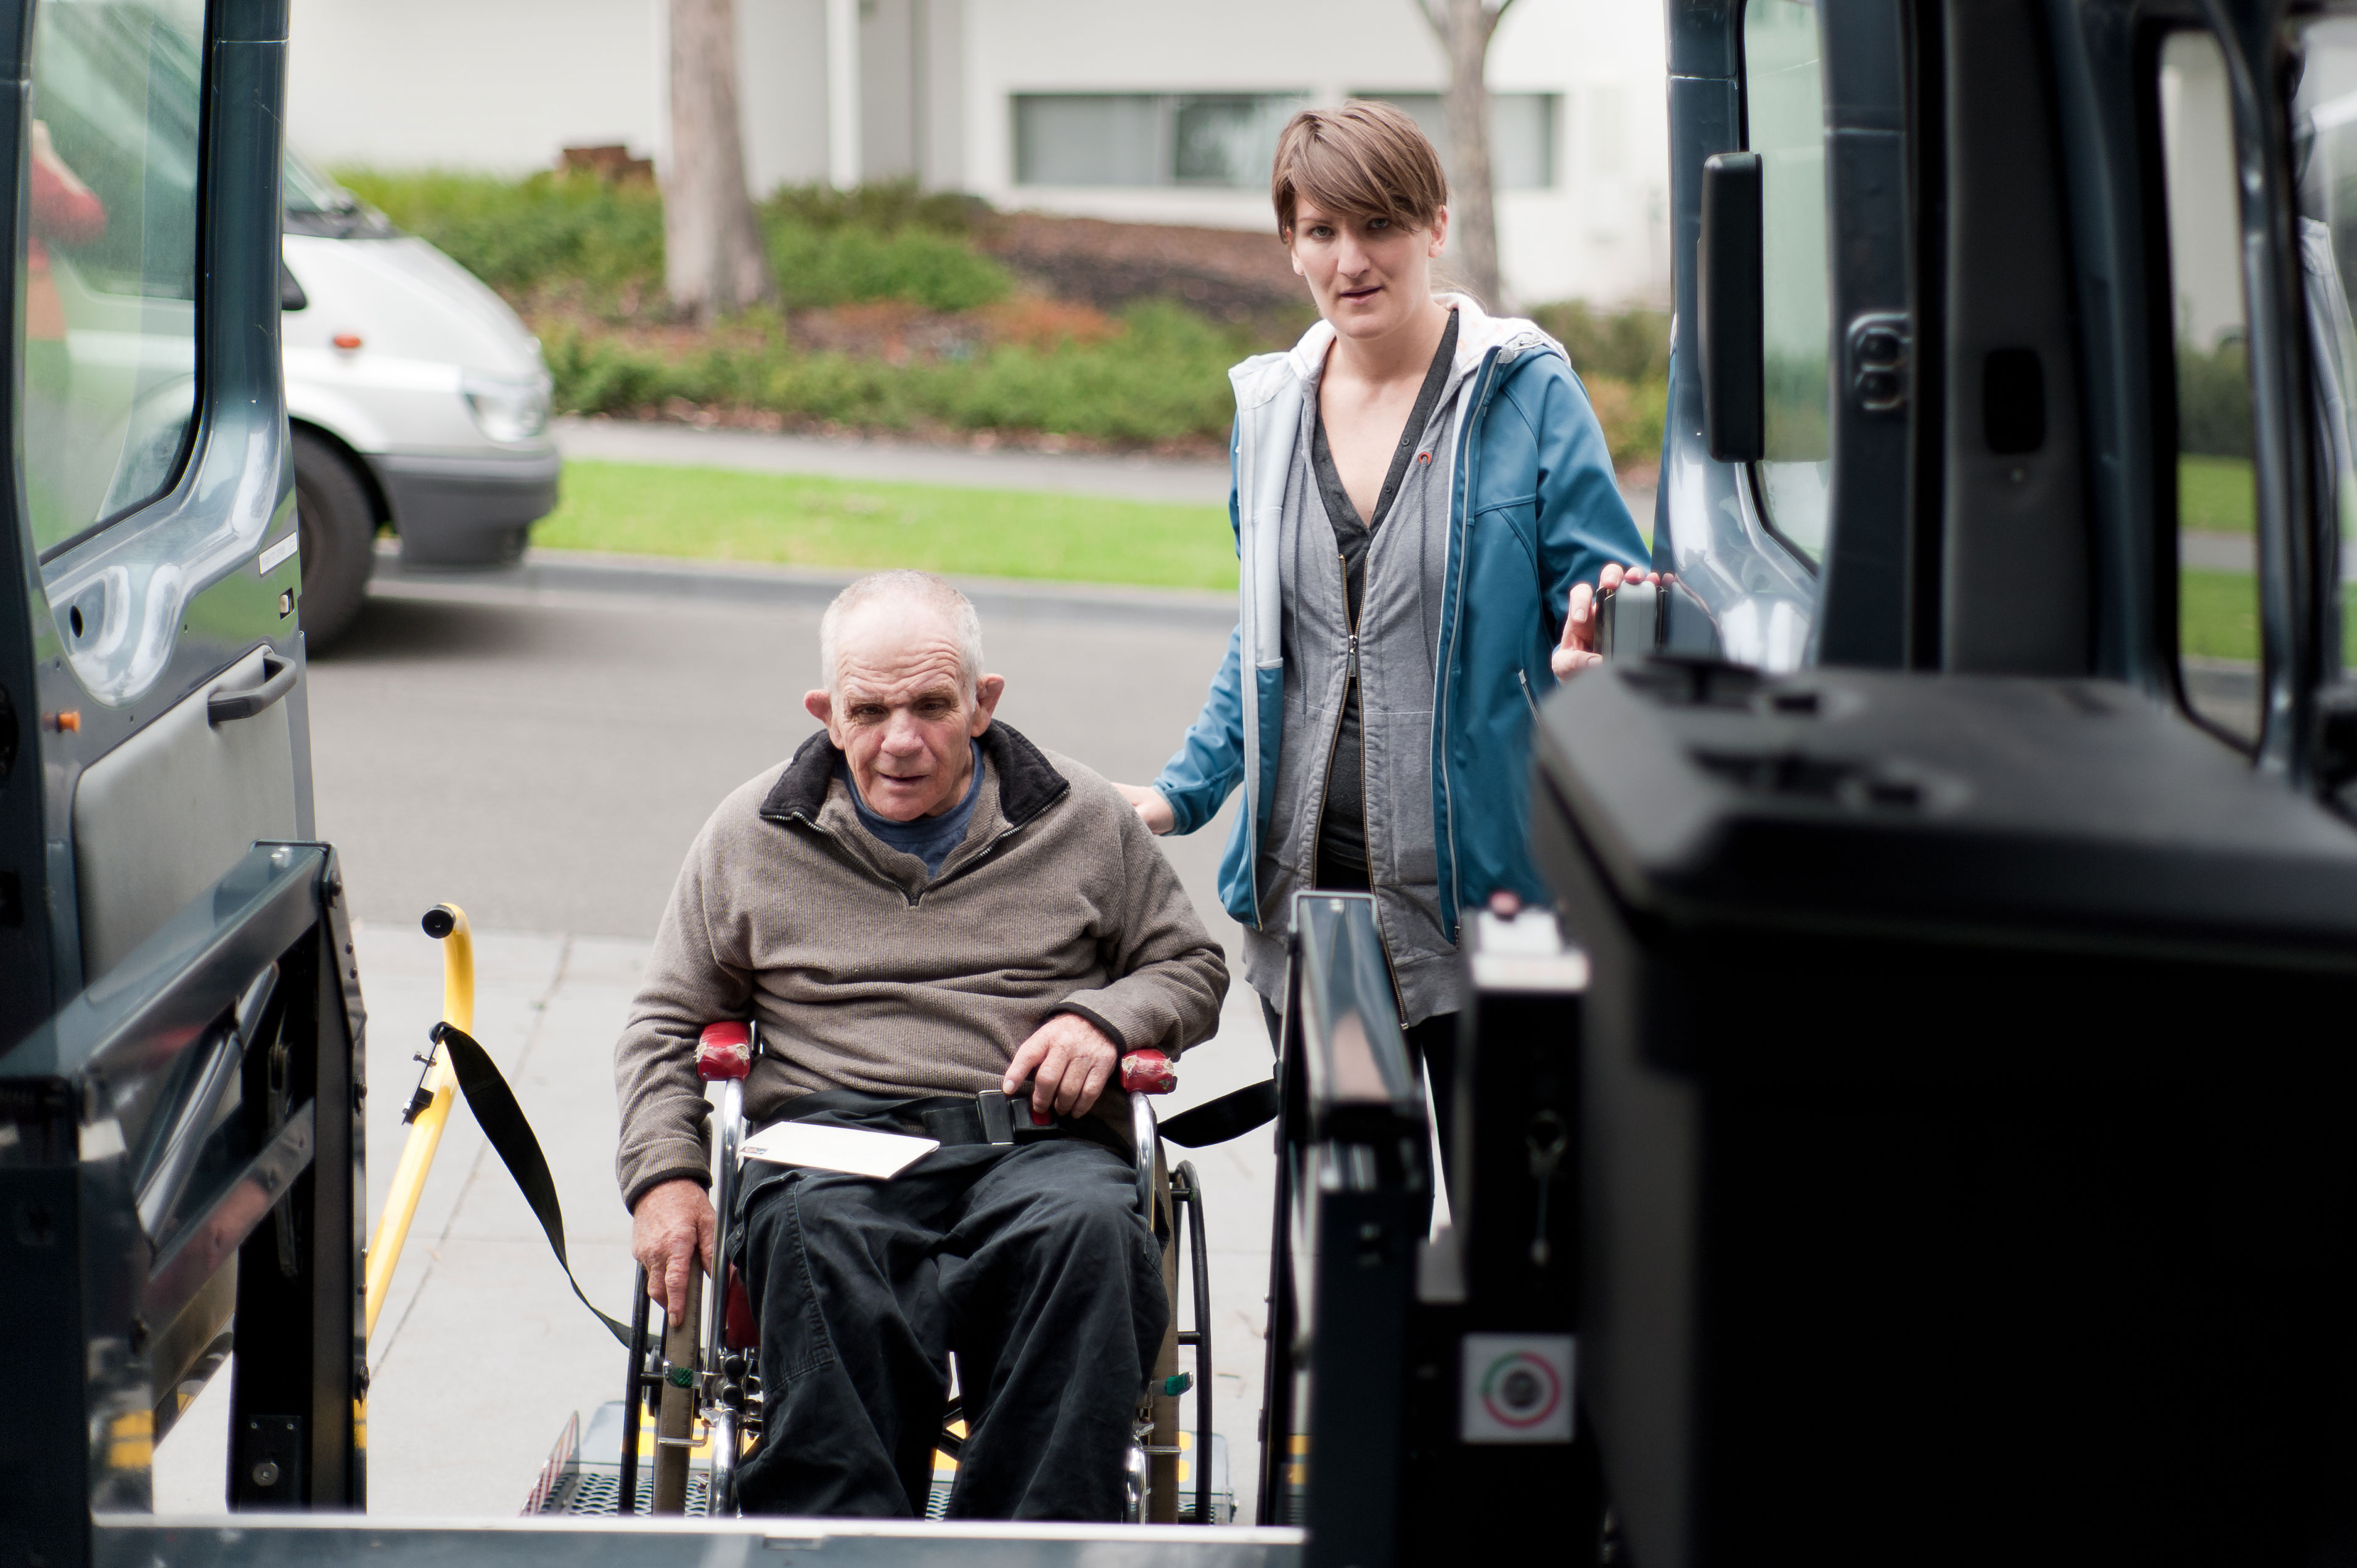 adult with disabilities receiving transportation services